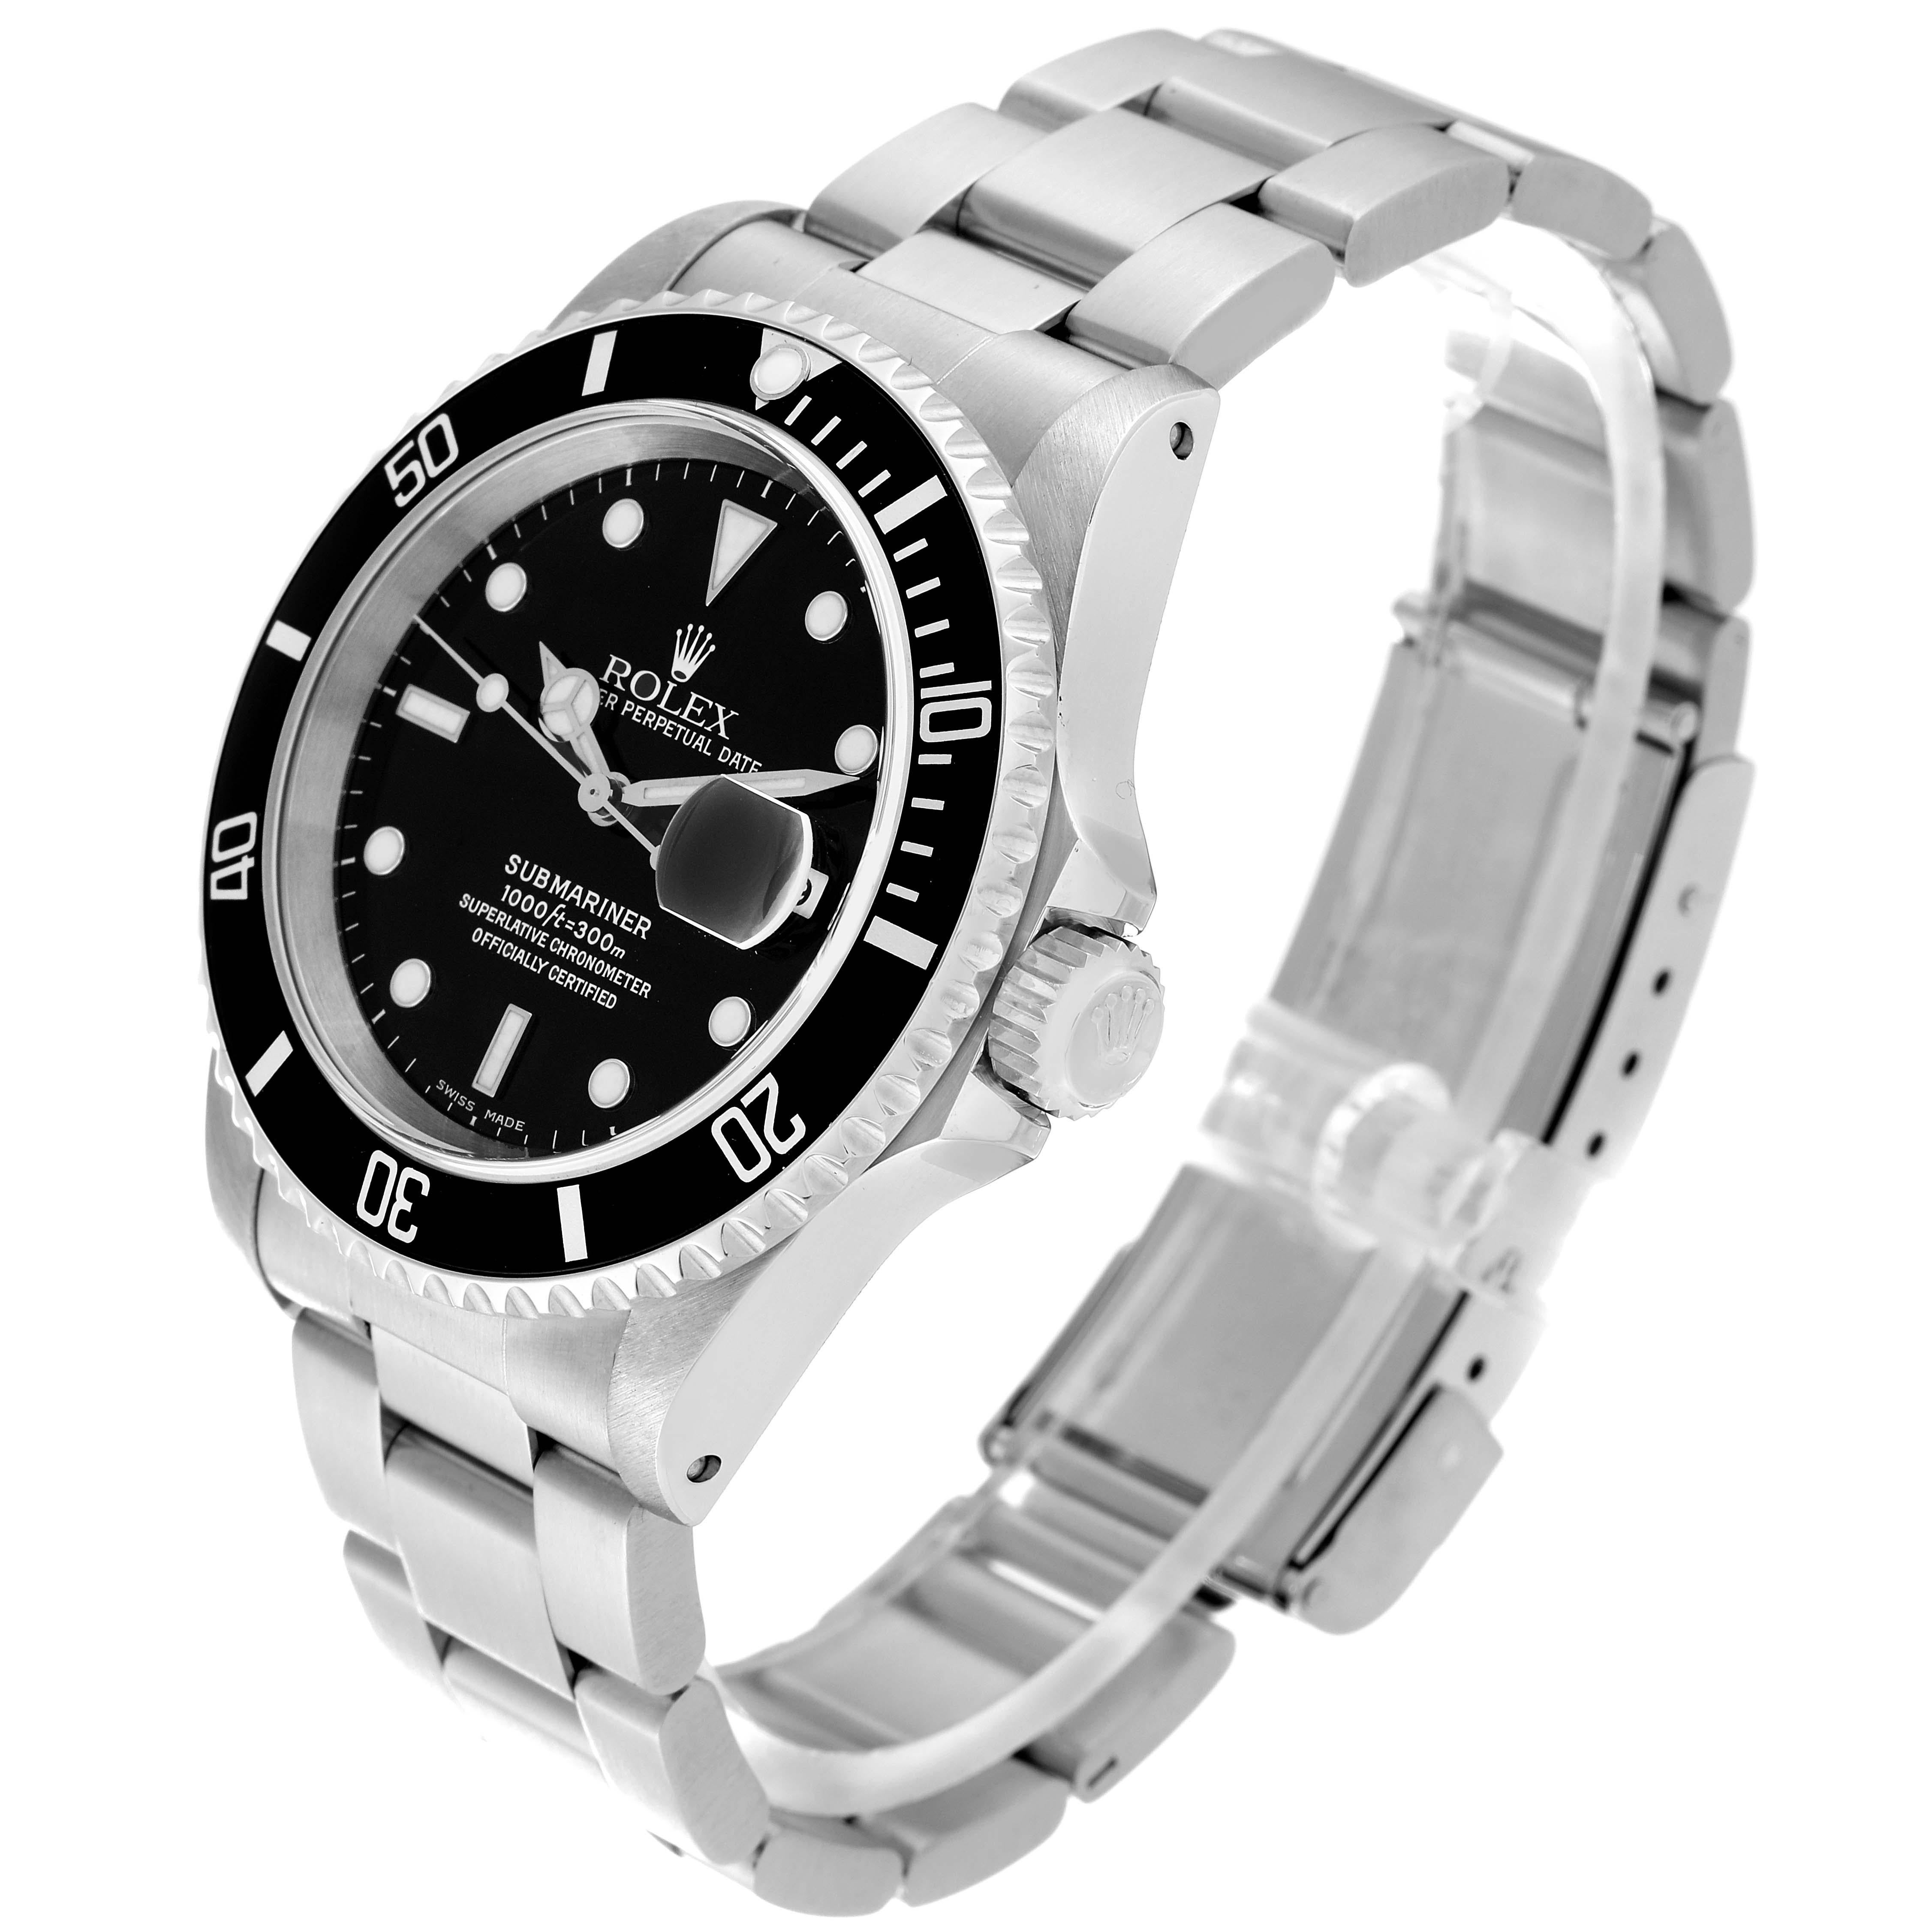 Rolex Submariner Date Black Dial Steel Mens Watch 16610 Box Papers 1